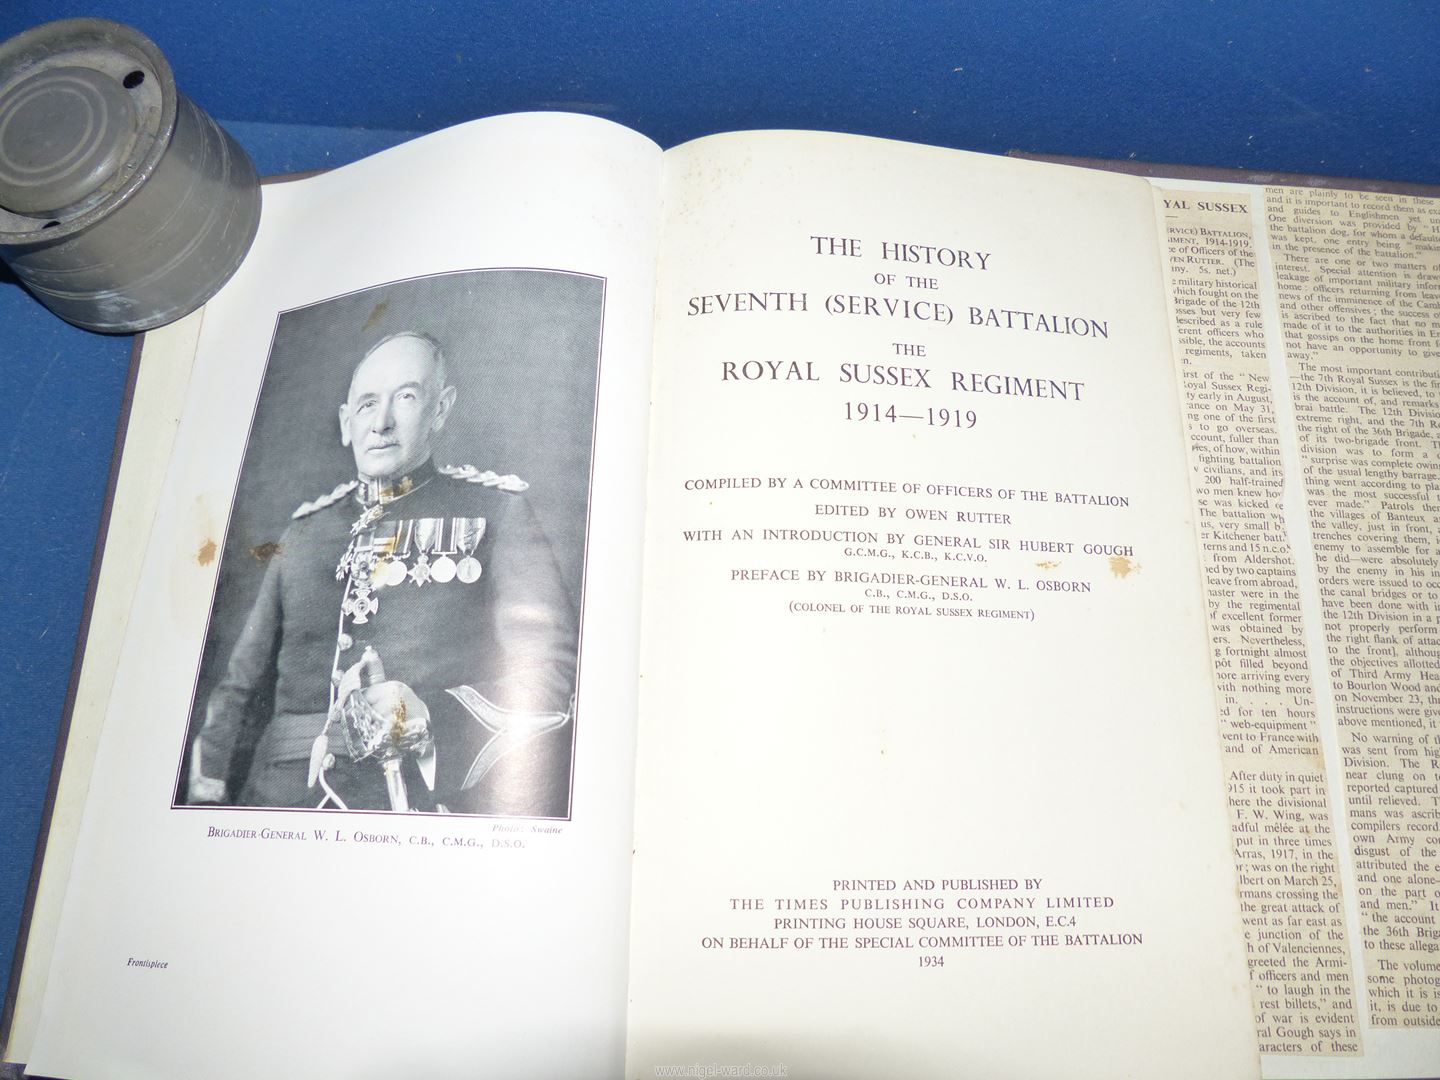 Two Volumes of The History of the Seventh (Service) Battalion - The Royal Sussex Regiment 1914-1919 - Image 3 of 7